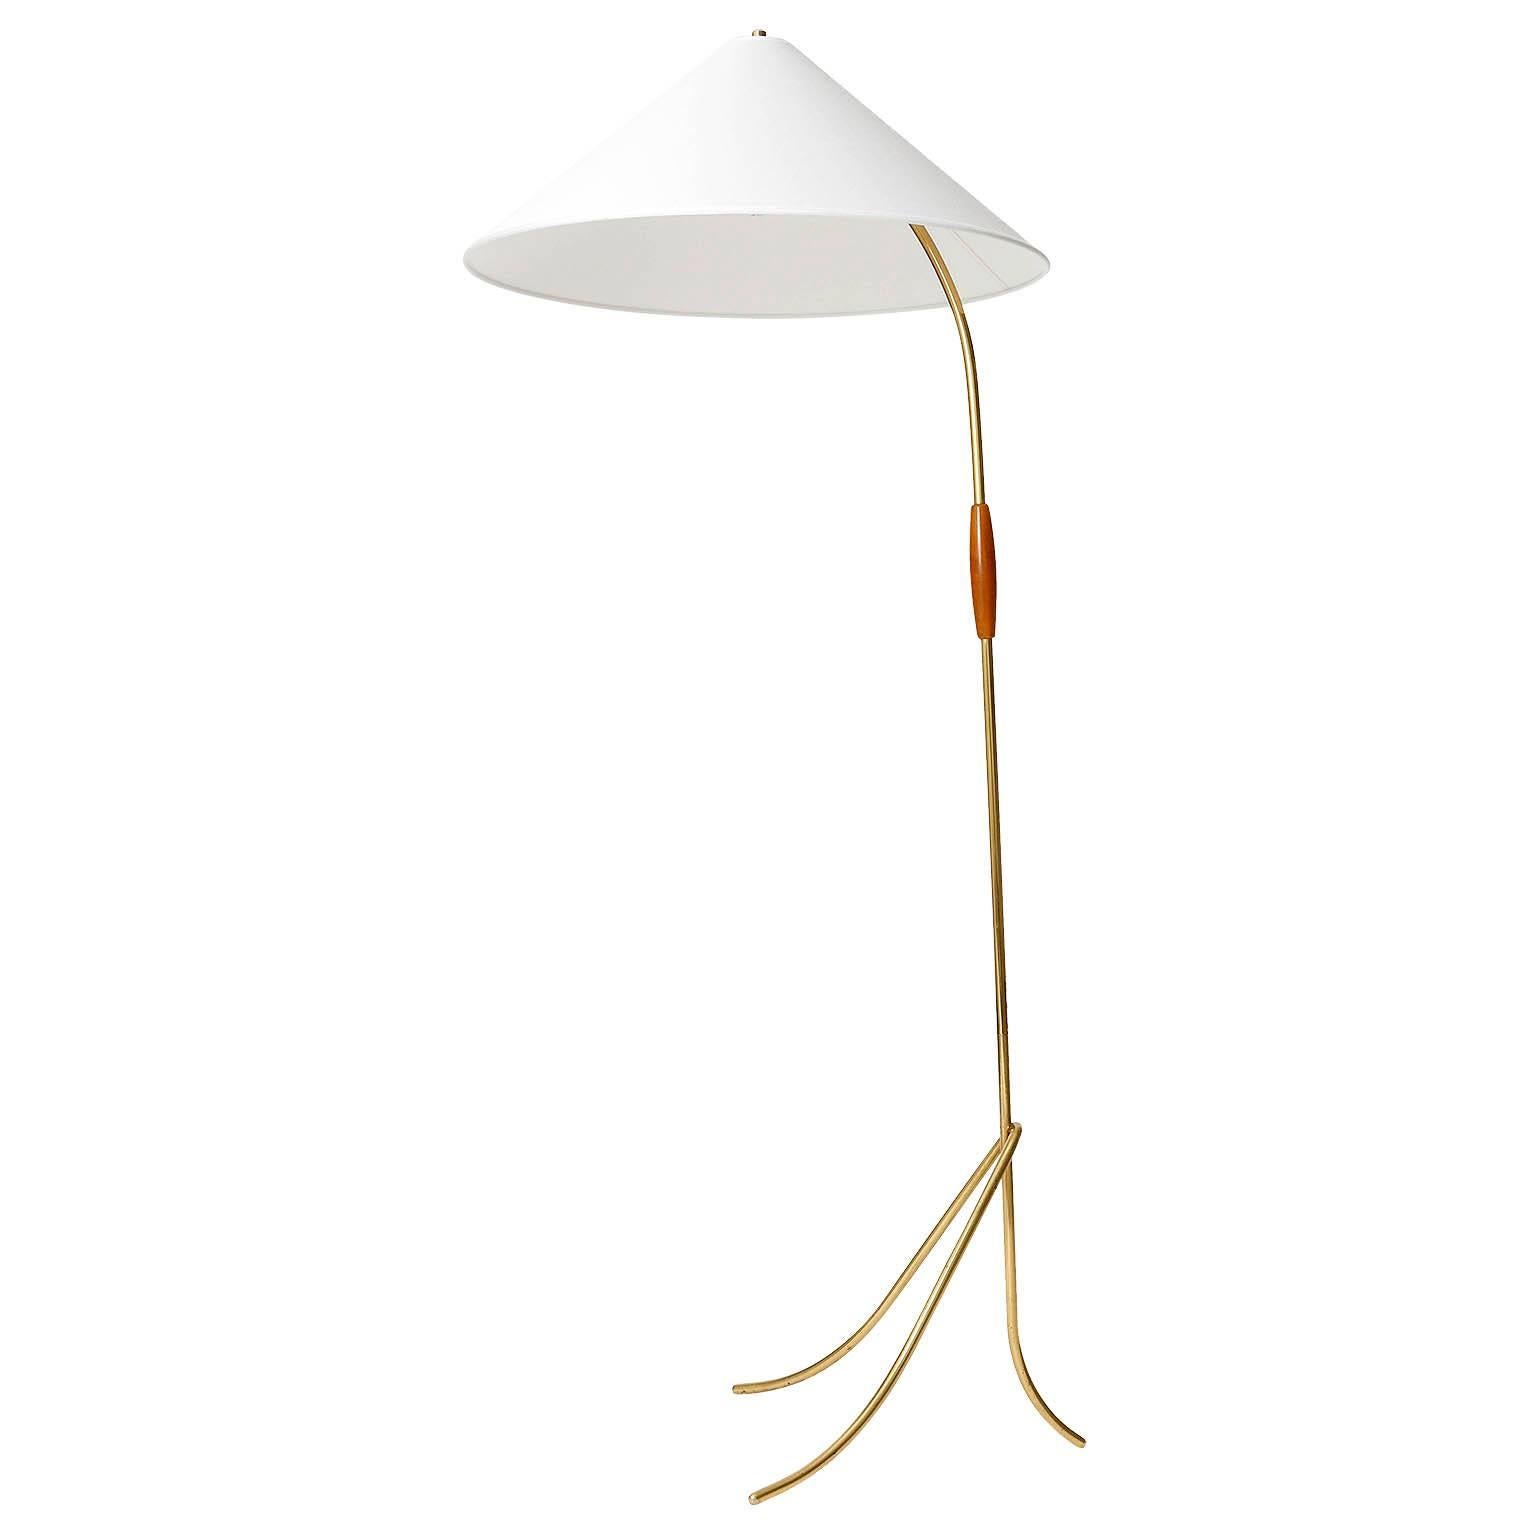 A gorgeous floor light by Rupert Nikoll, Austria, manufactured in Mid-Century, circa 1960 (late 1950s or early 1960s).
The light is very similar to the floor lamp model 'Hase' (engl. rabbit) designed by J.T. Kalmar.
A white textile lamp shade sits